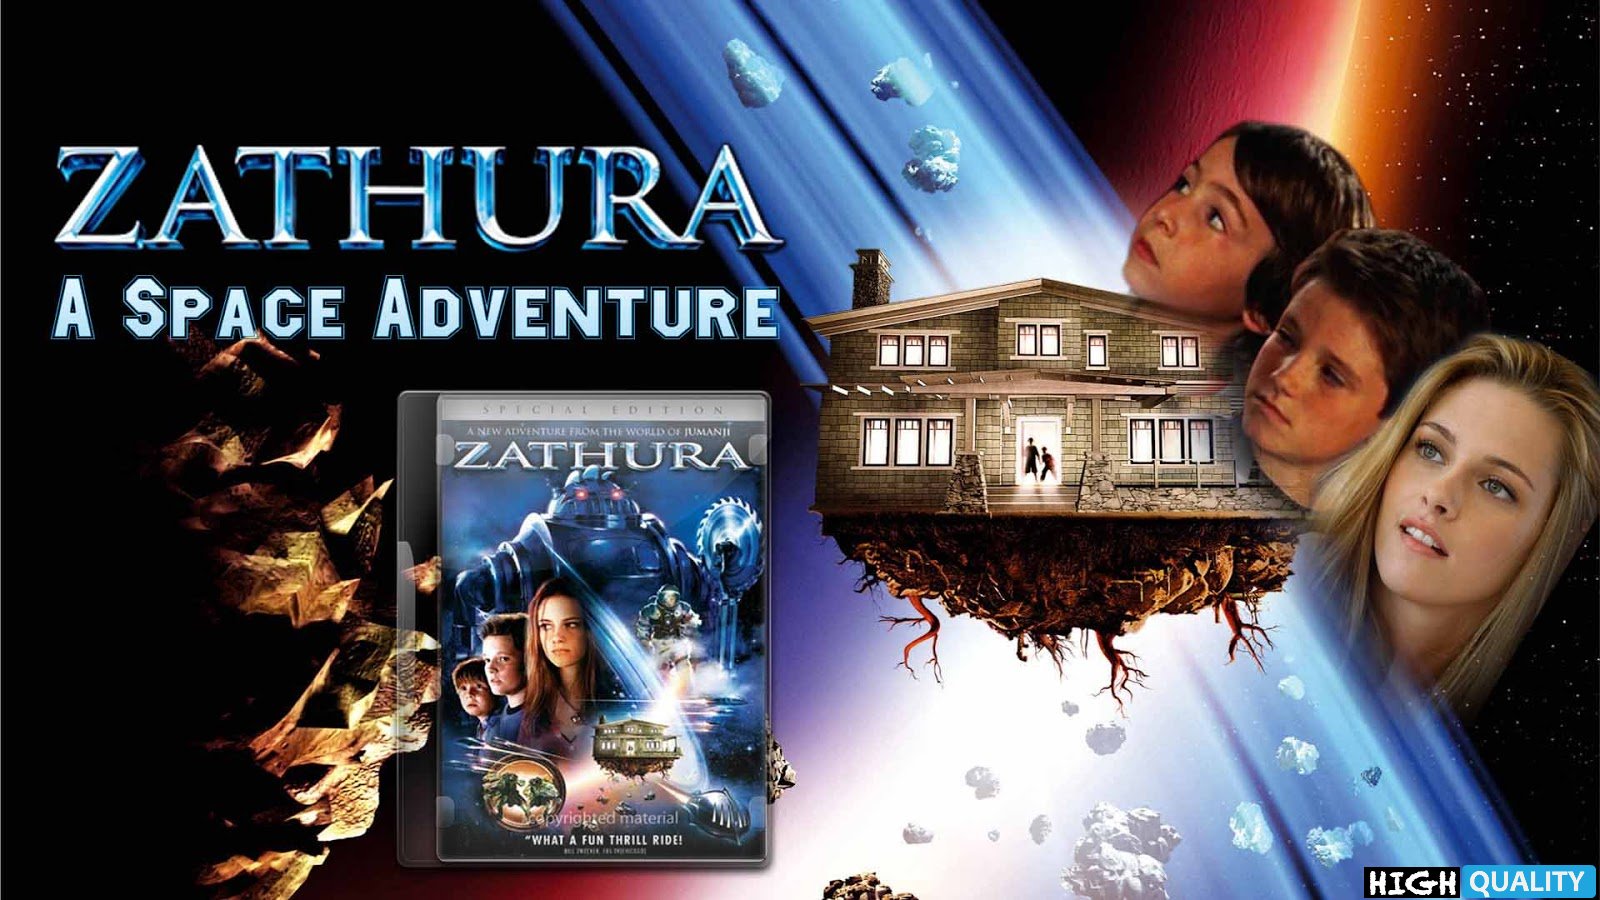 Amazing Zathura: A Space Adventure Pictures & Backgrounds